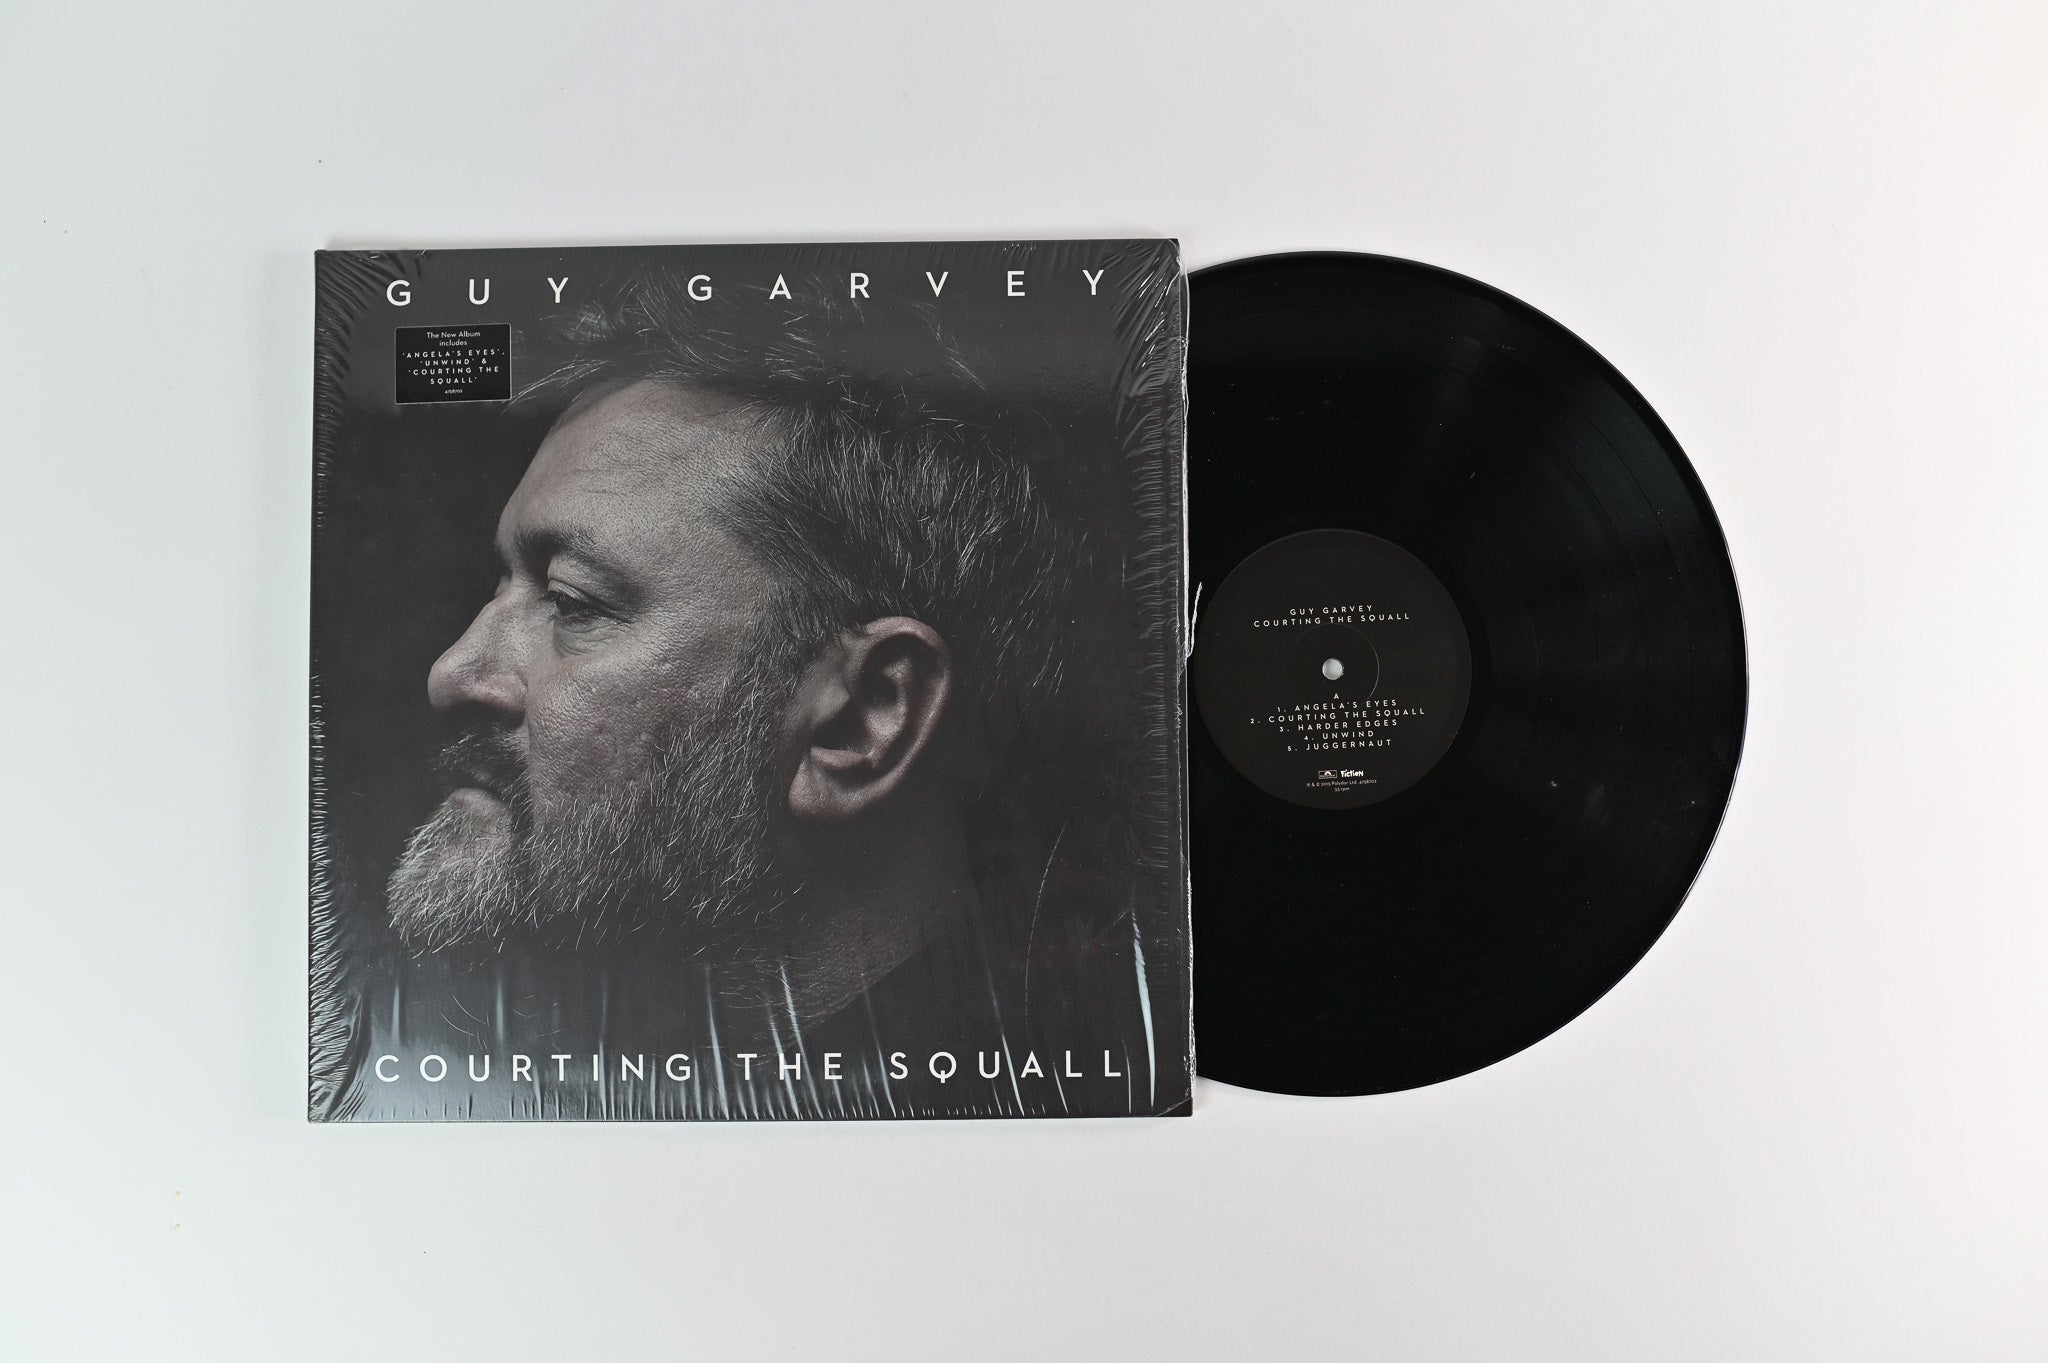 Guy Garvey - Courting The Squall on Polydor Friction